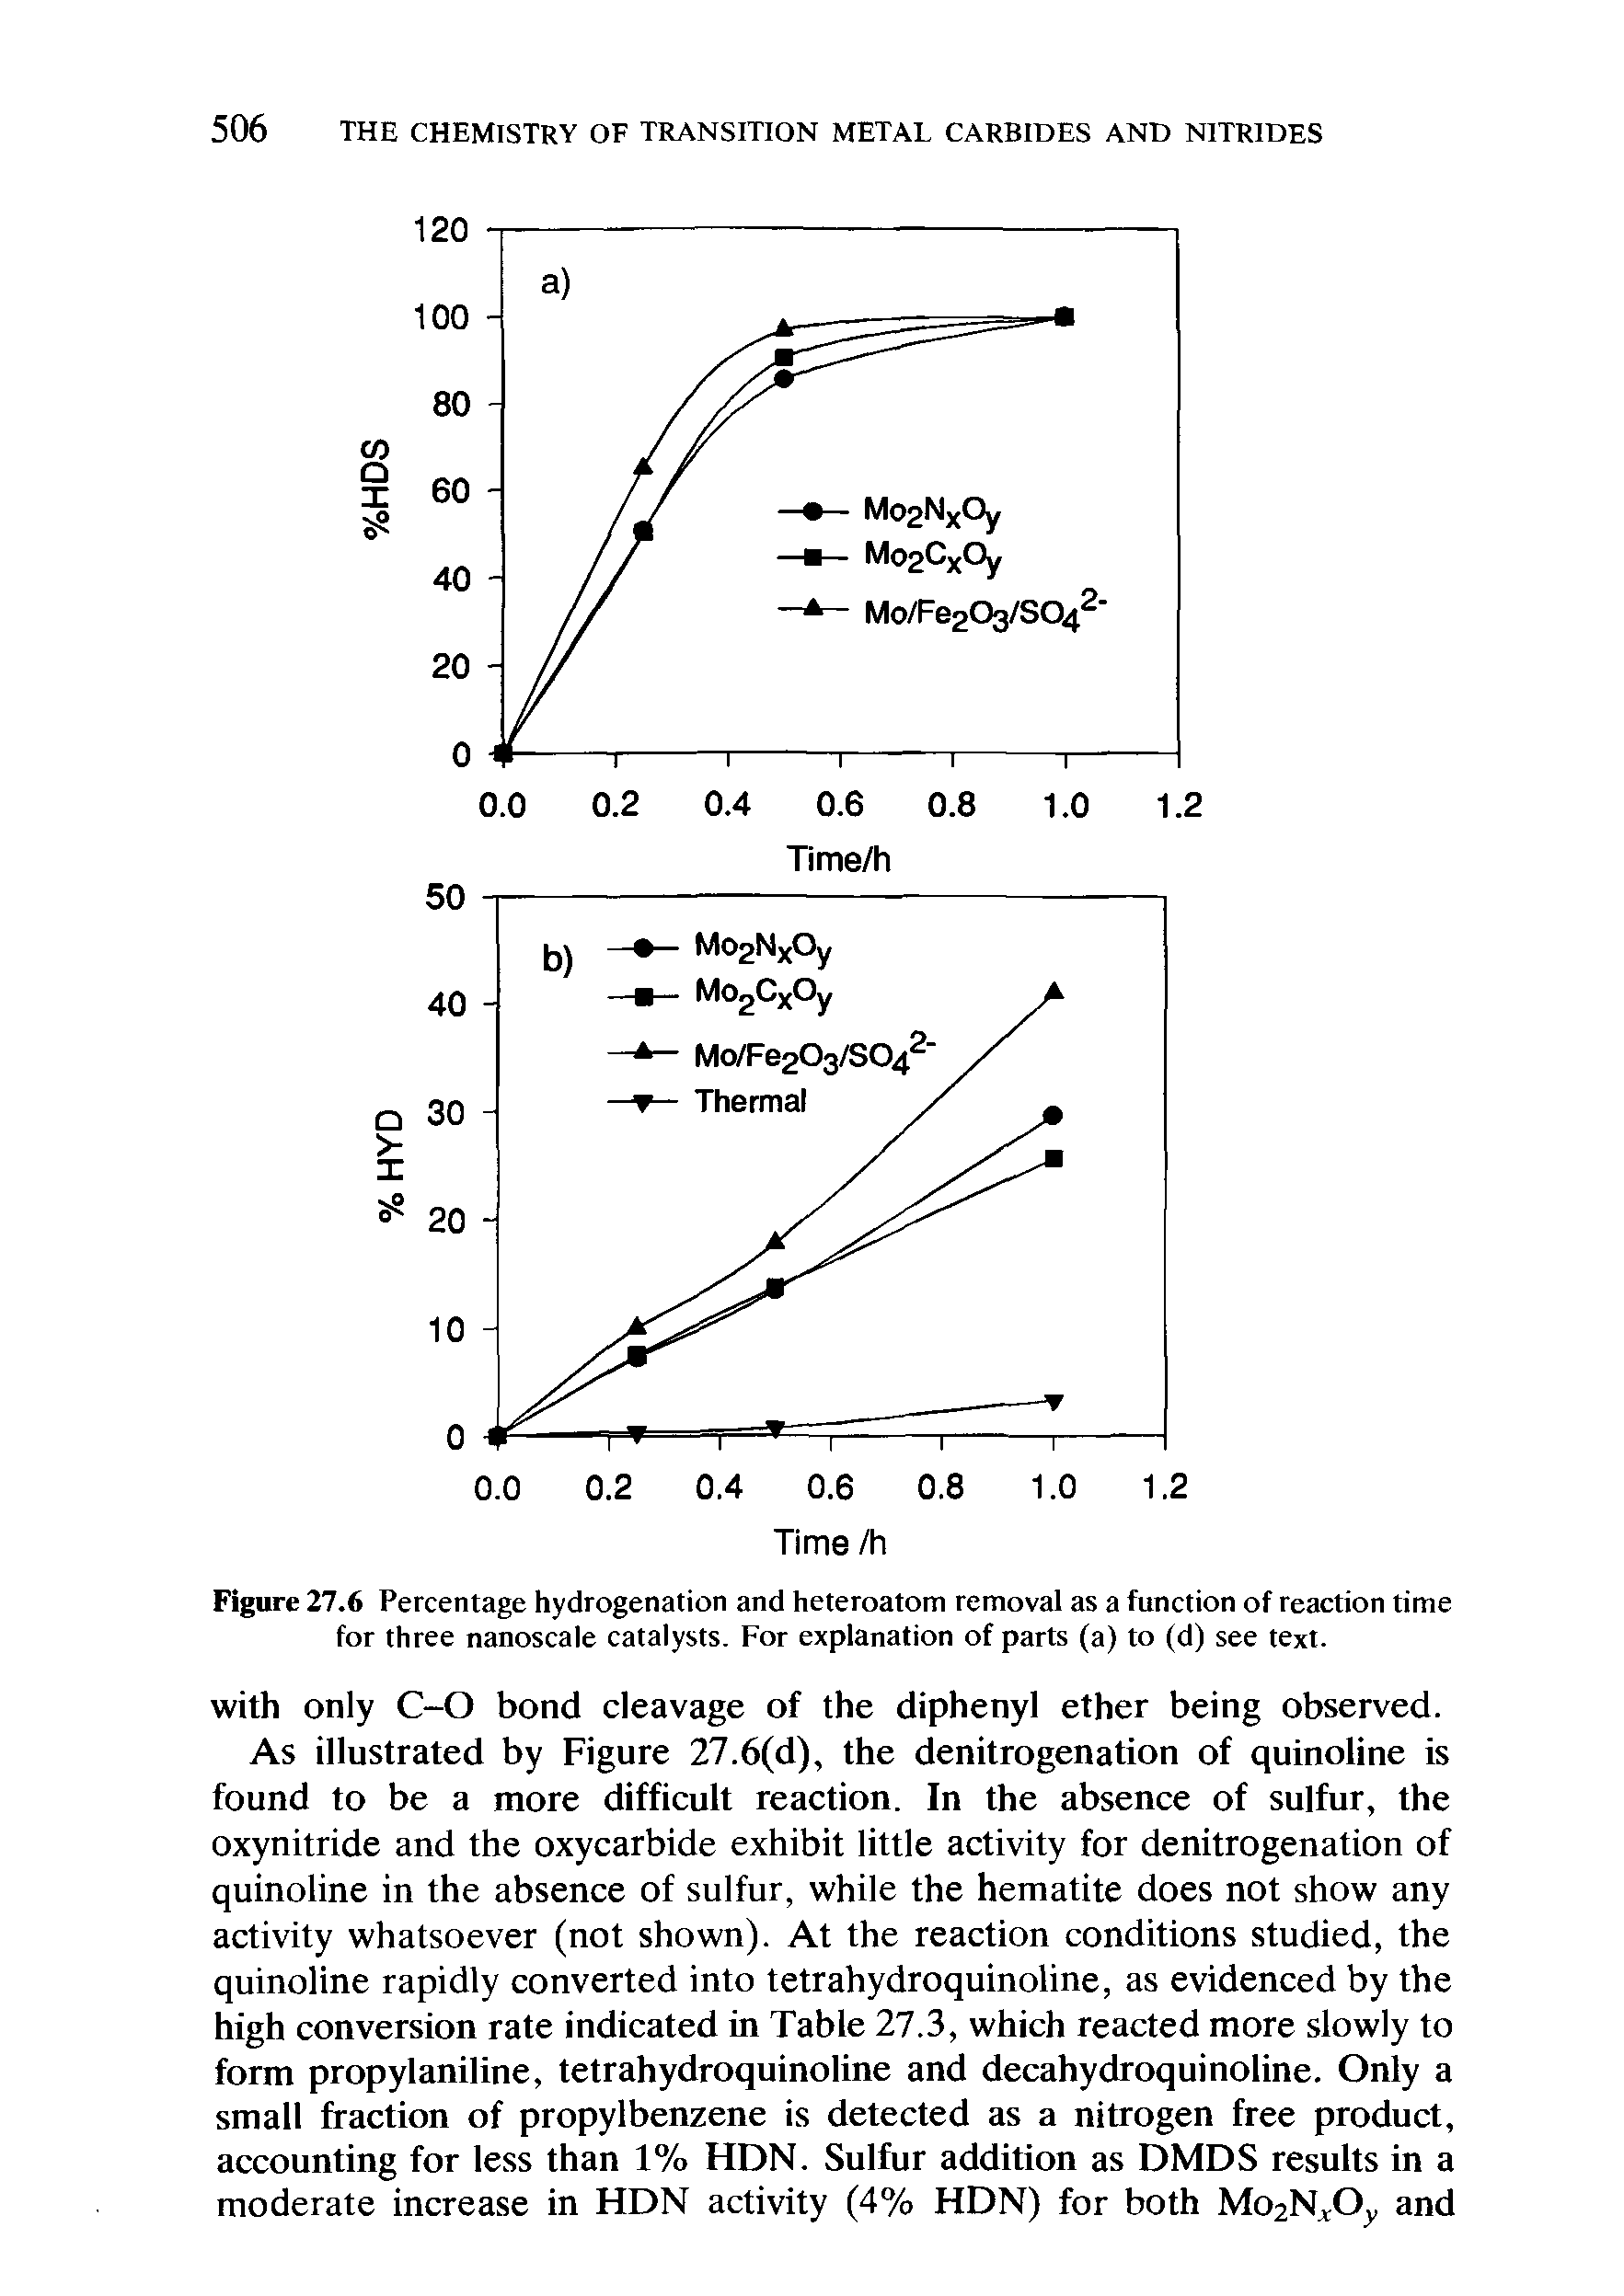 Figure 27.6 Percentage hydrogenation and heteroatom removal as a function of reaction time for three nanoscale catalysts. For explanation of parts (a) to (d) see text.